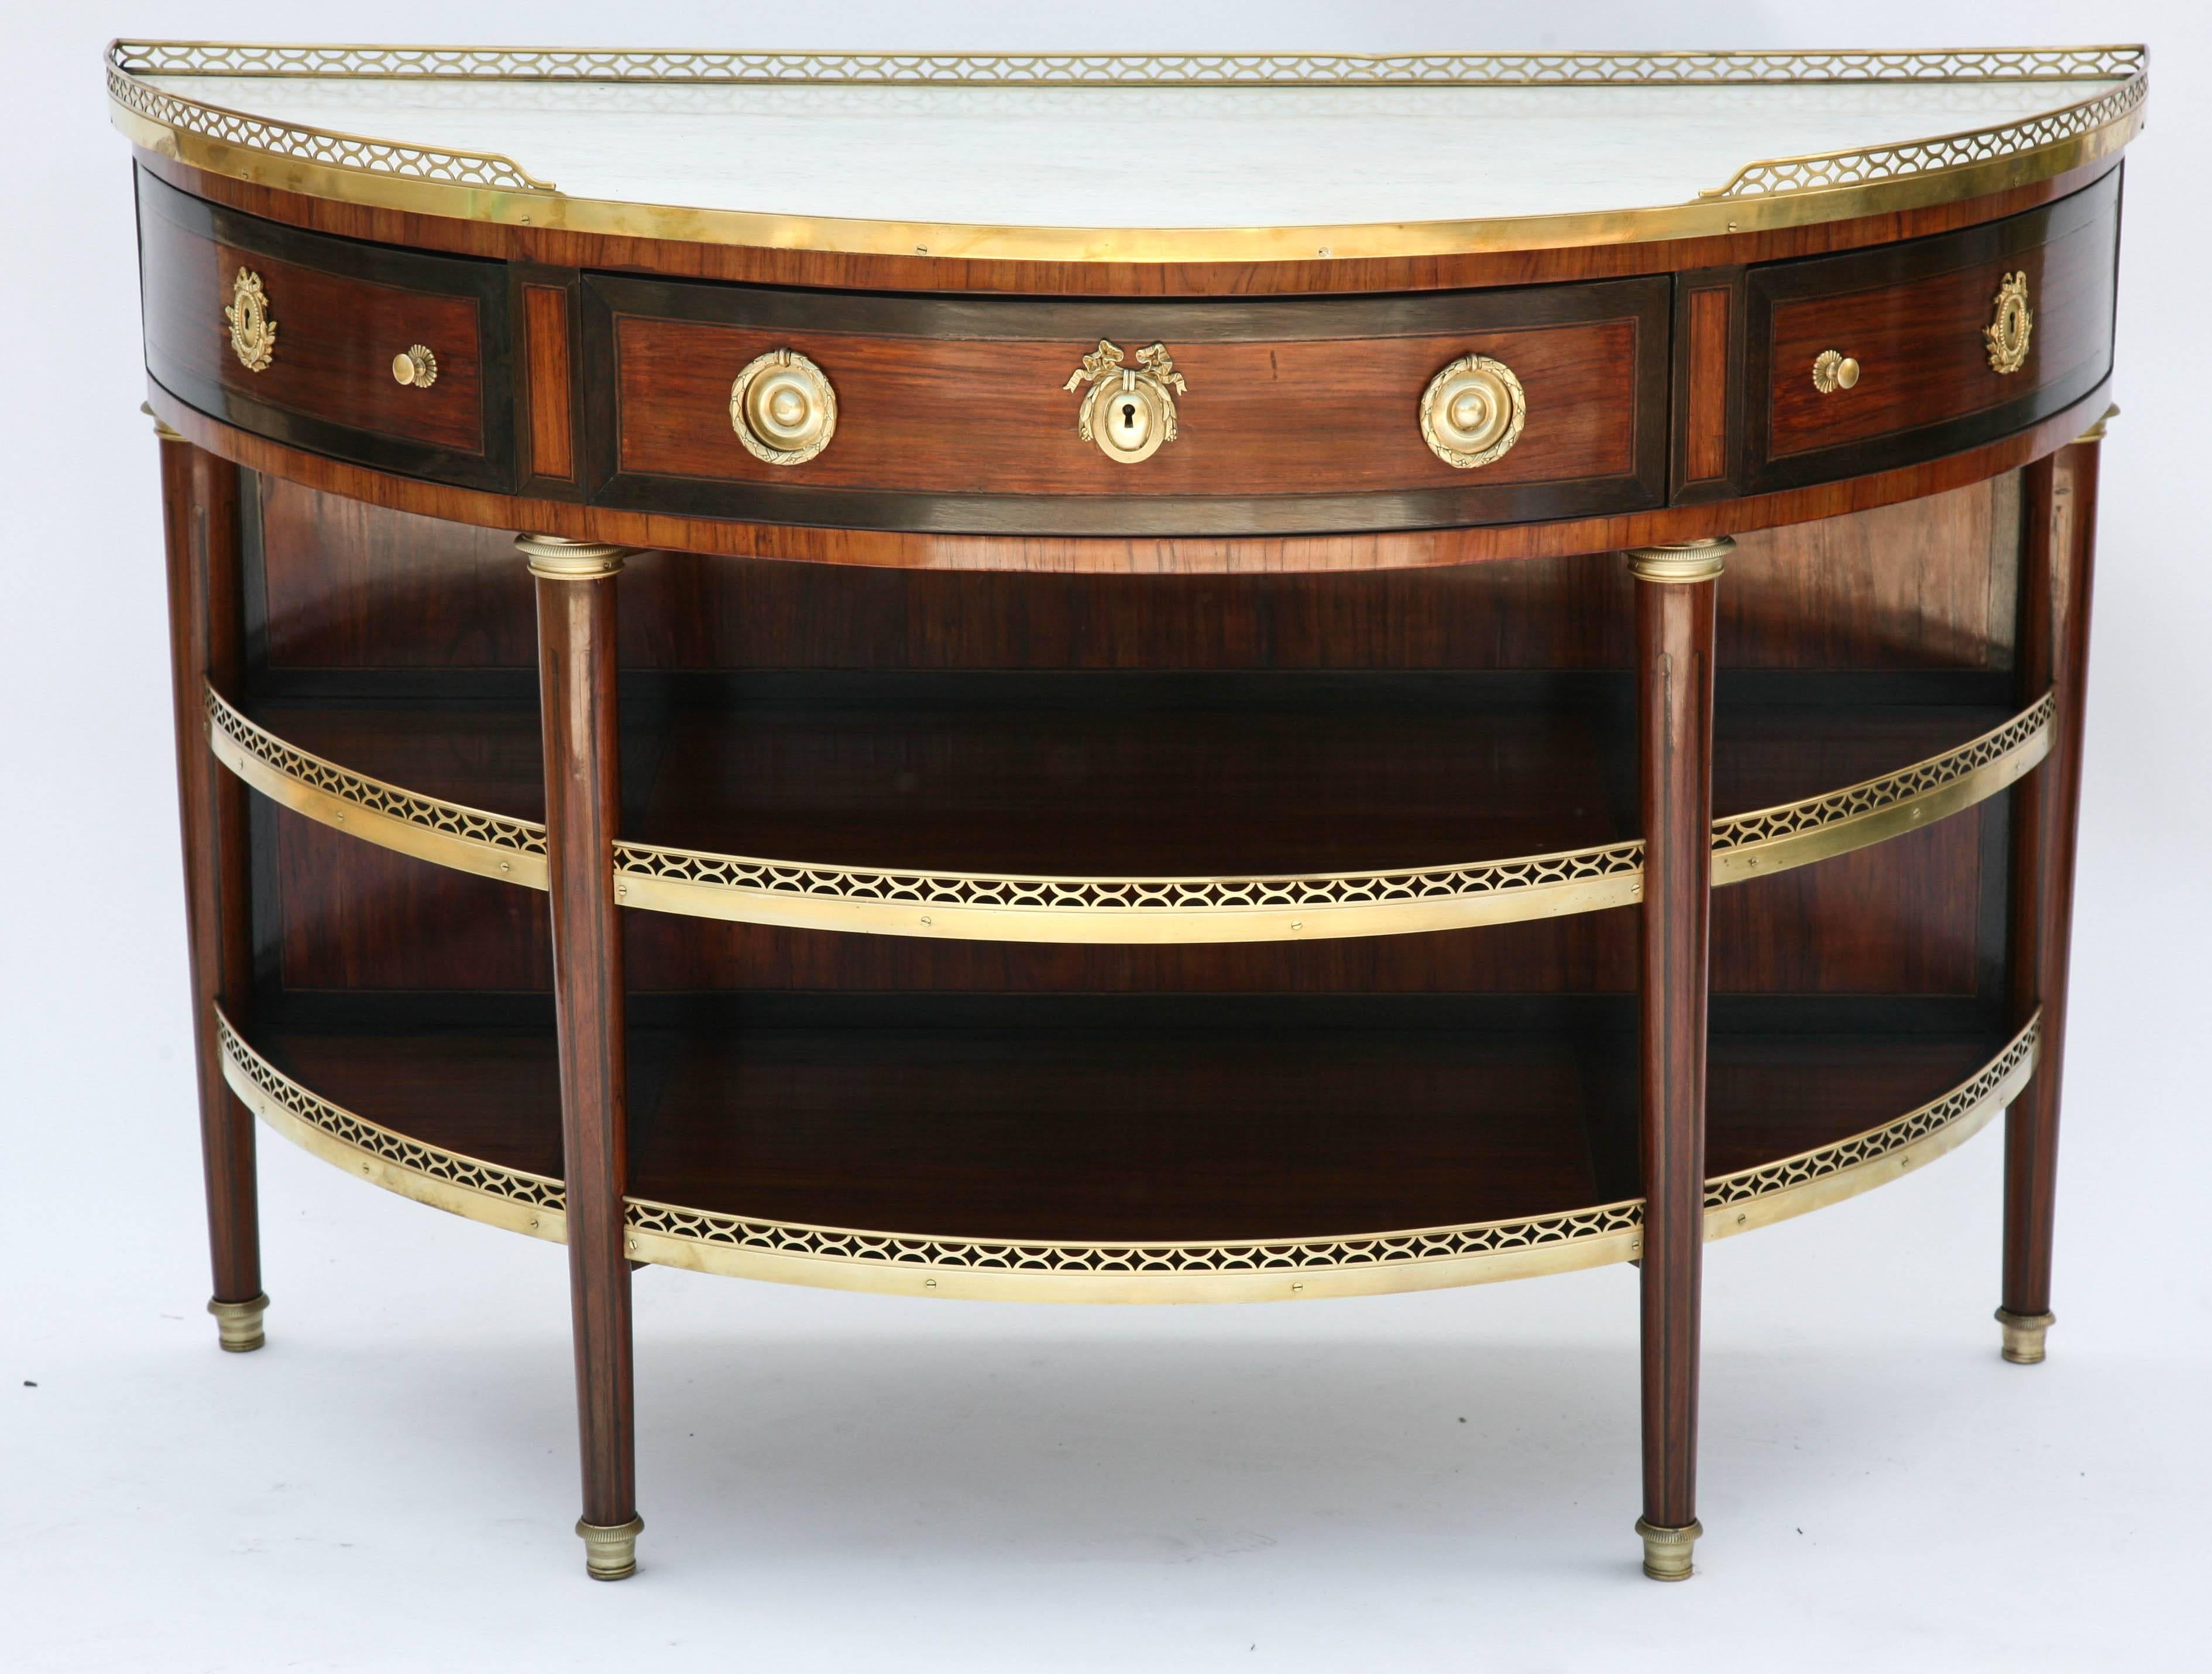 A fine pair of Louis XVI mahogany console dessértes, each having a pierced 3/4 quarter gallery and white marble top, above a single frieze drawer and two smaller drawers, all trimmed with crossbanding, having ormolu pulls and escutcheons, raised on